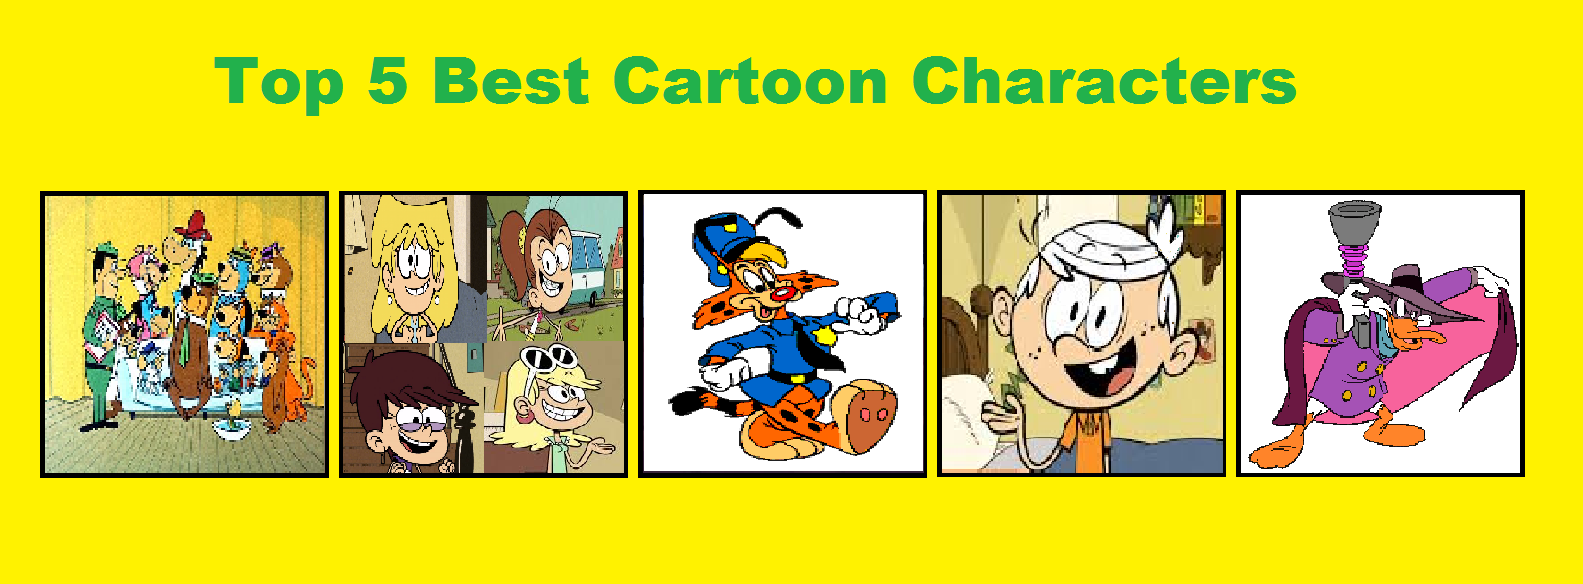 My Top 5 Best Cartoon Characters by Bart-Toons on DeviantArt